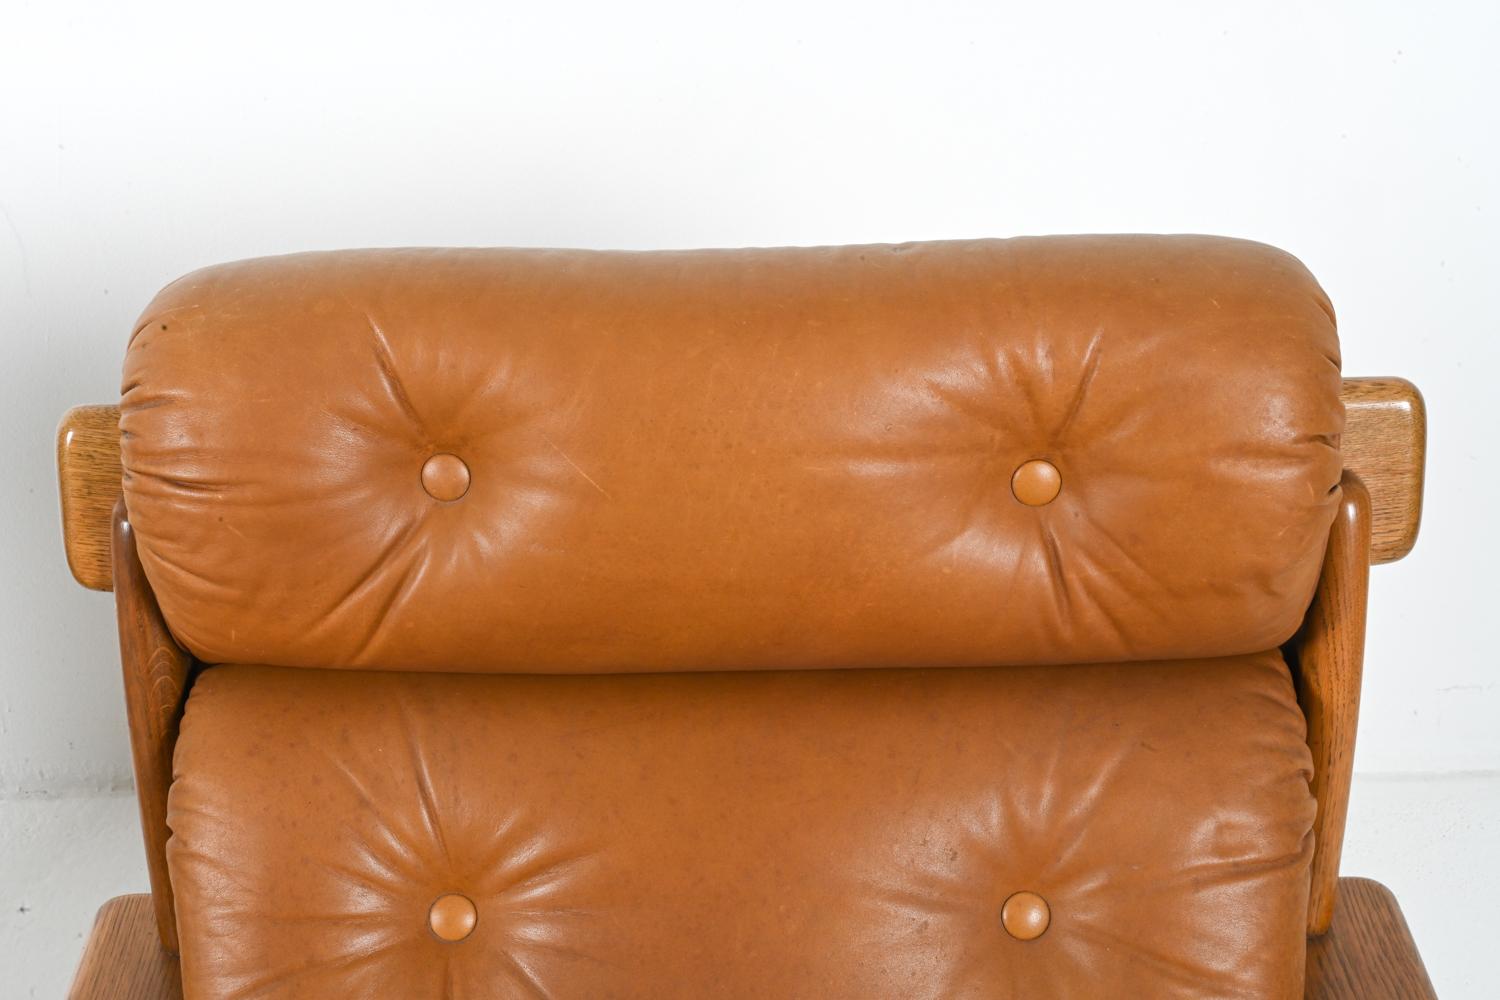 Pair of European Brutalist Armchairs in Oak & Leather, c. 1970's For Sale 3